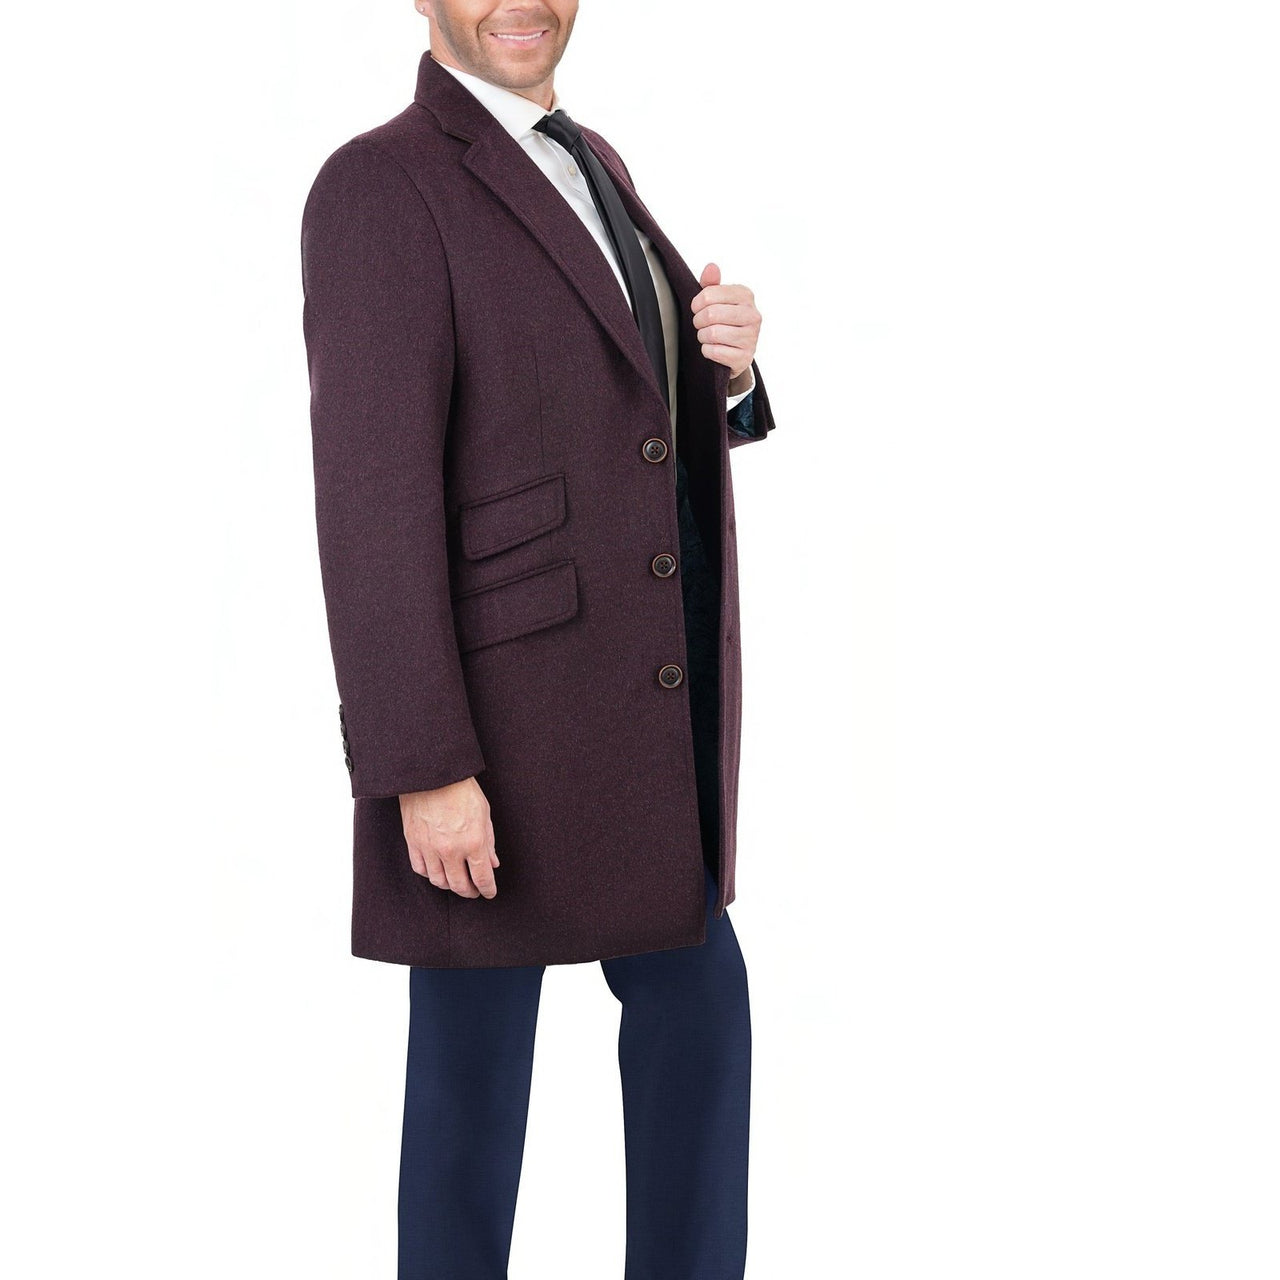 Arthur Black OUTERWEAR The Suit Depot Men's Wool Cashmere Single Breasted Burgundy 3/4 Length Top Coat